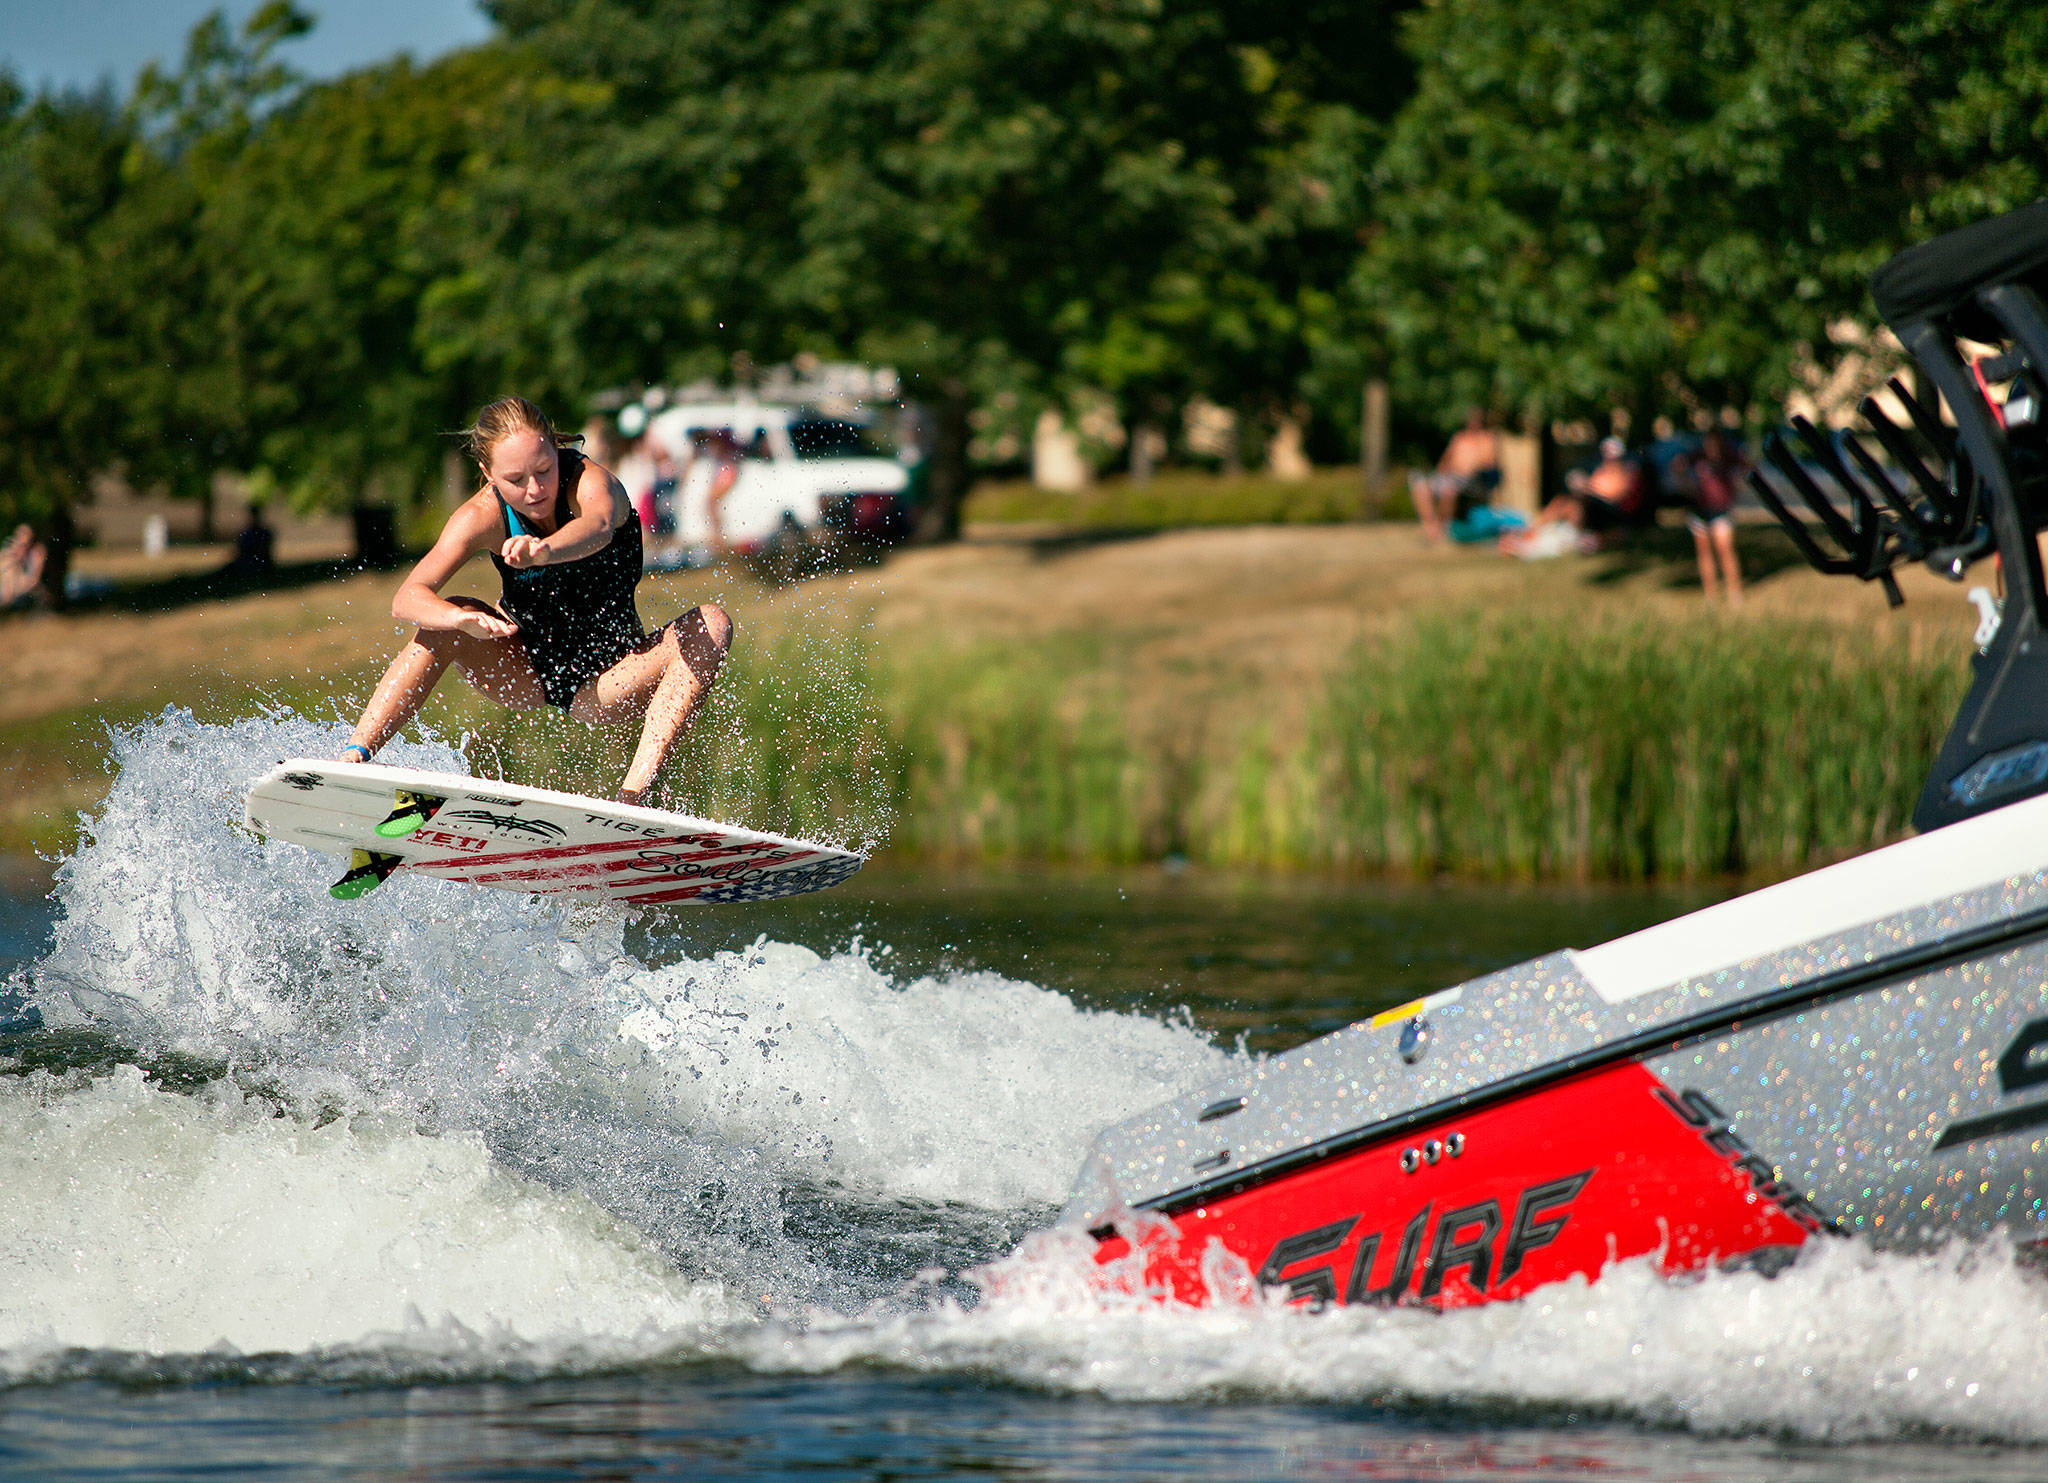 At the 2017 Northwest Wake Surf Open, held July 14-16 on Lake Tye in Monroe, about 95 amateur and professional wakesurfers of all ages competed for $10,000 in prize money. The event was sponsored by INT League. (Courtesy INT League/Photo by Burton B. Cooper)